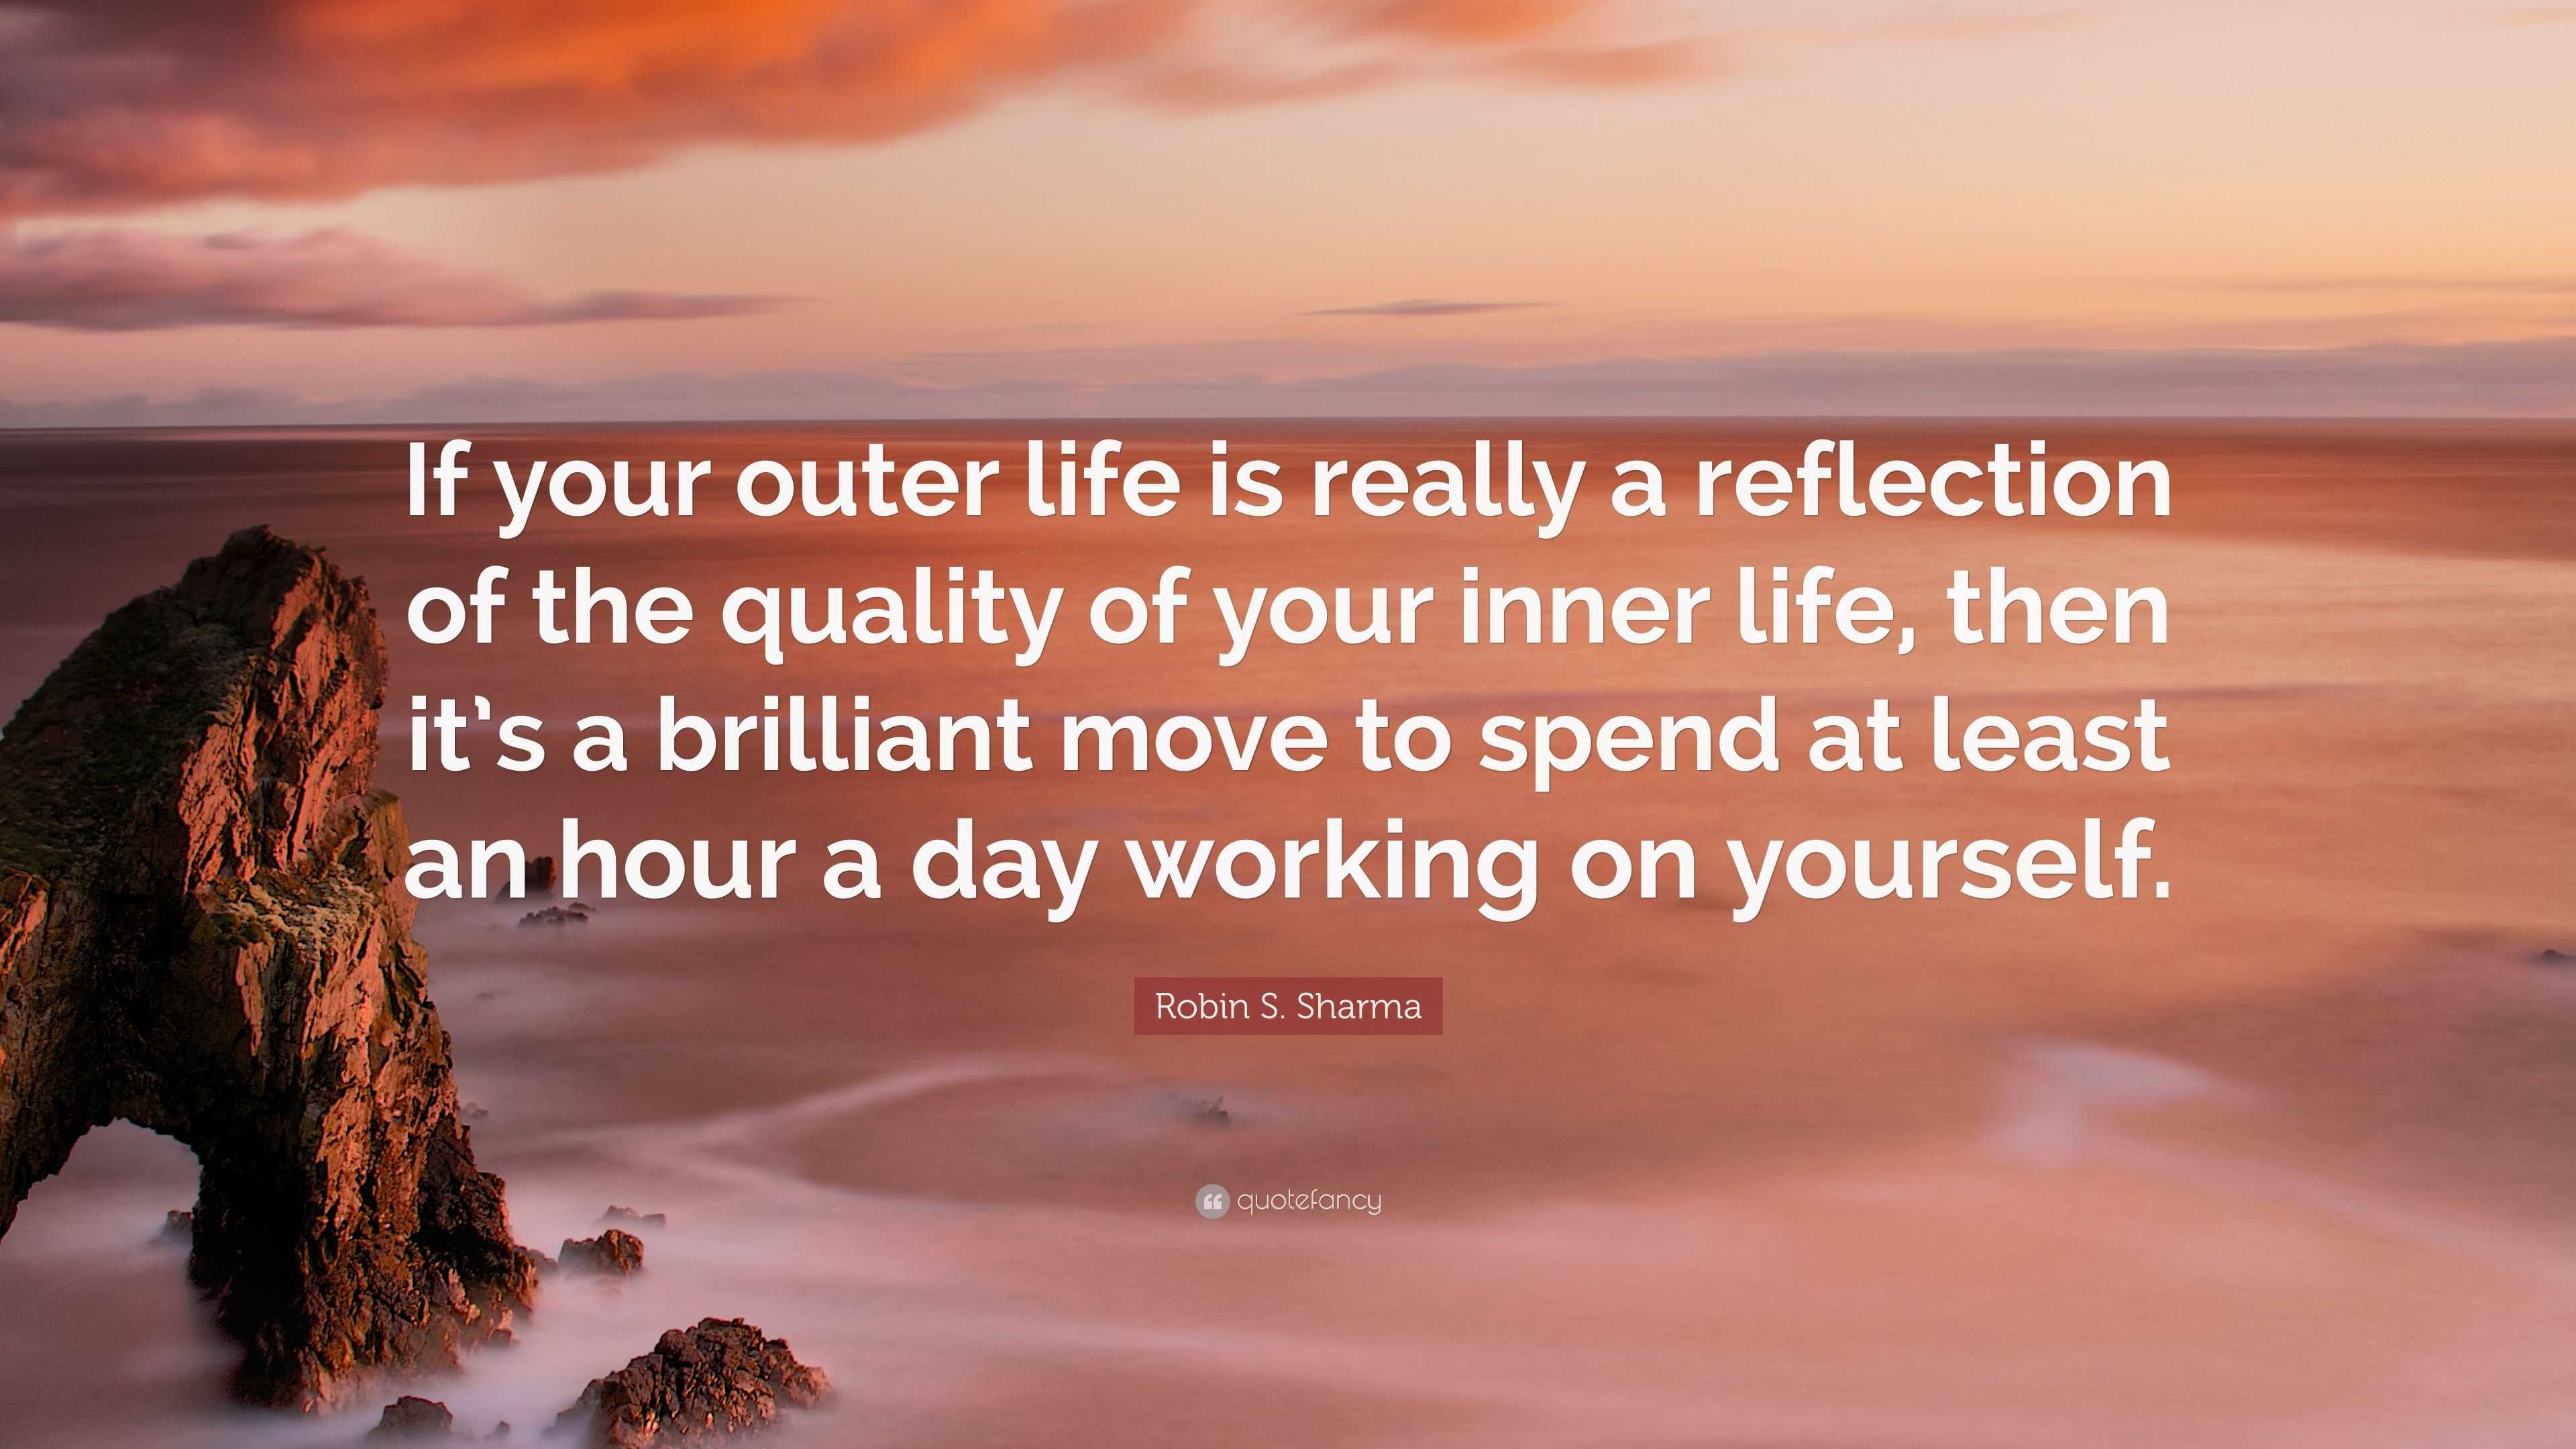 5294754-Robin-S-Sharma-Quote-If-your-outer-life-is-really-a-reflection-of.jpg